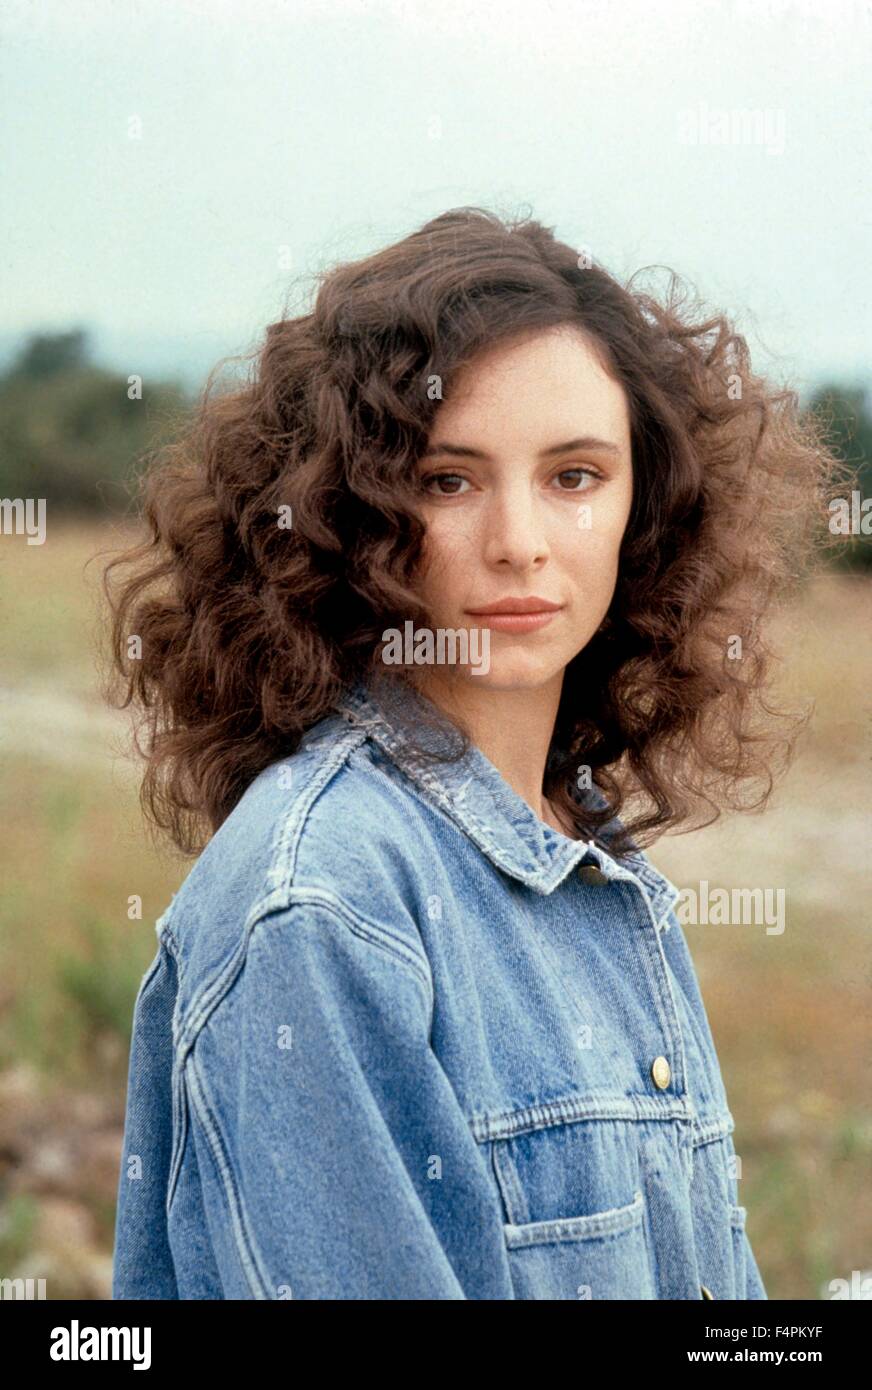 Madeleine Stowe / Revenge / 1990 directed by Tony Scott [Columbia Pictures] Stock Photo